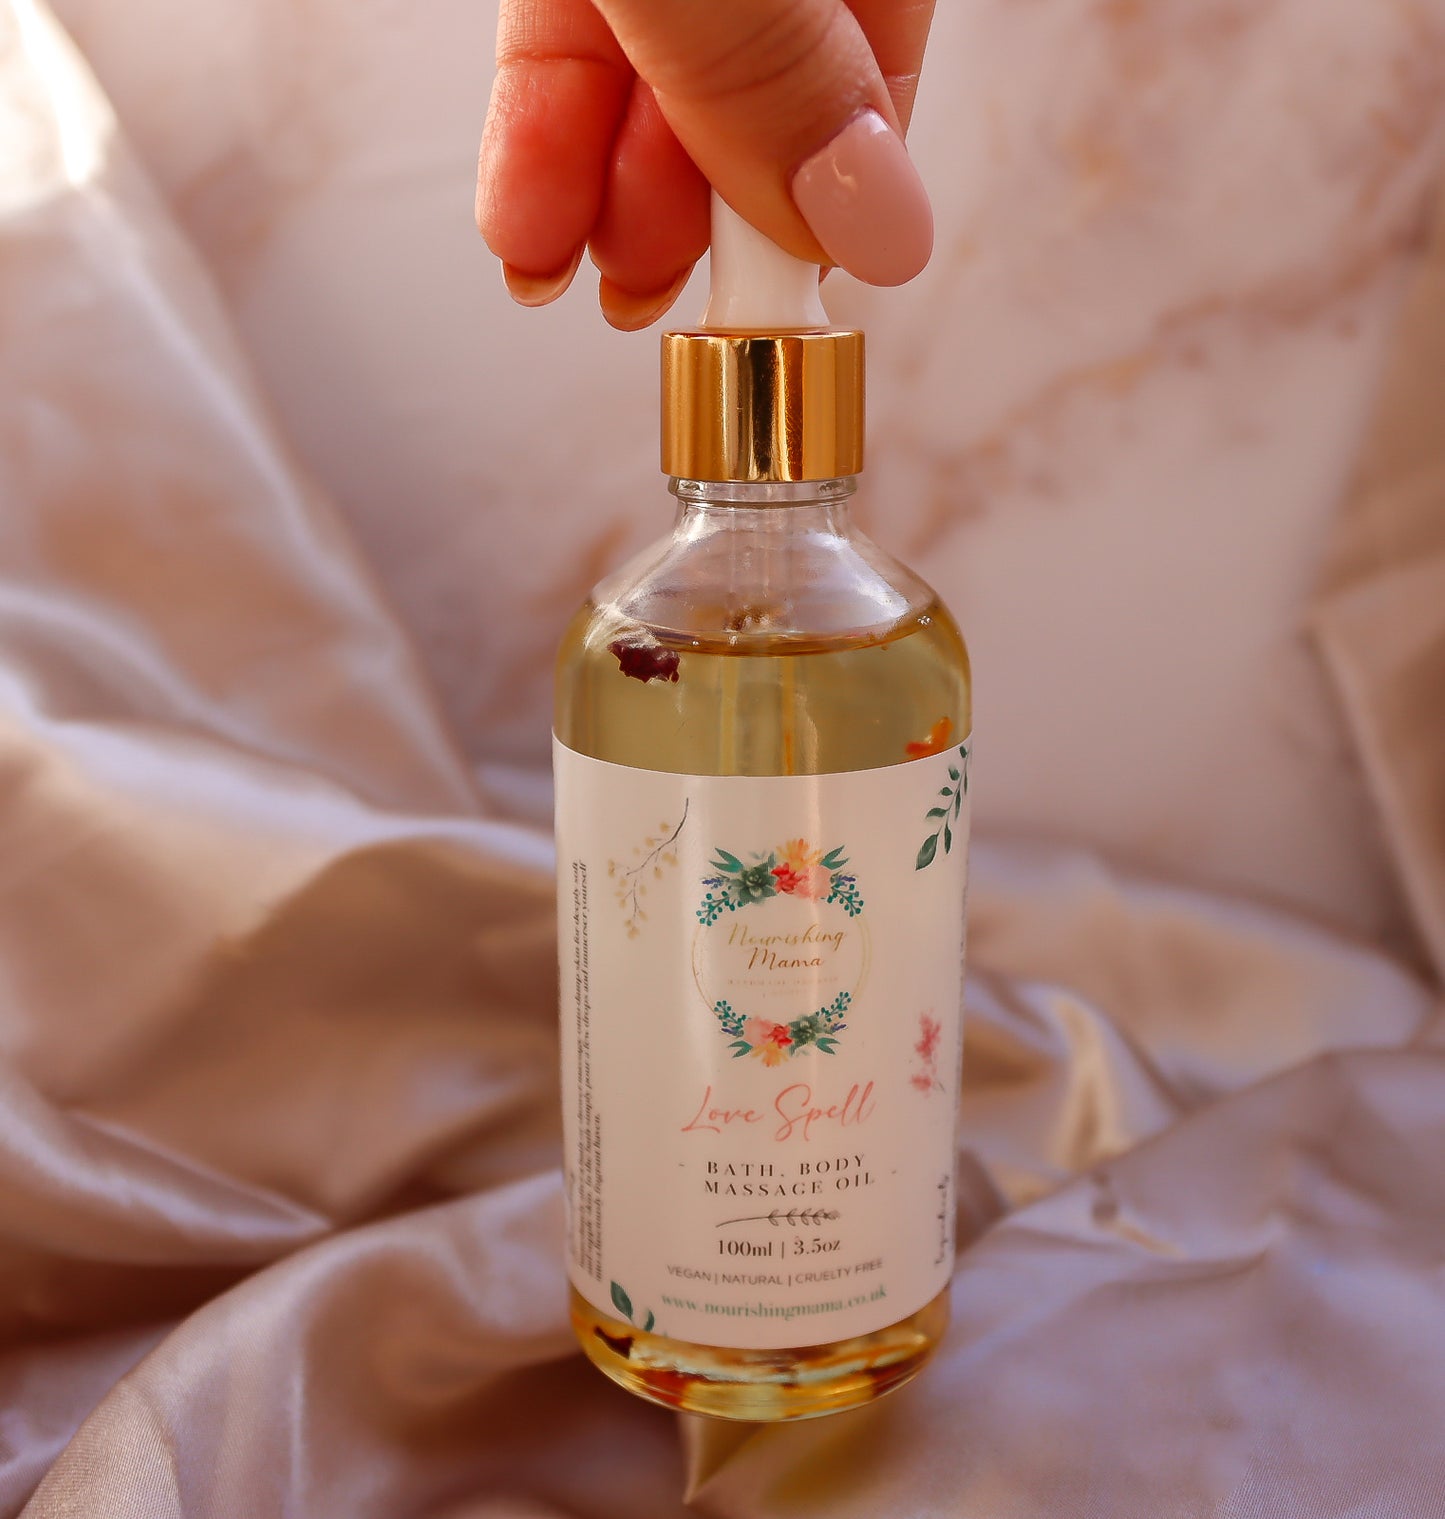 A hand holding a bottle of of Nourishing Mama Oil with the finger tips 